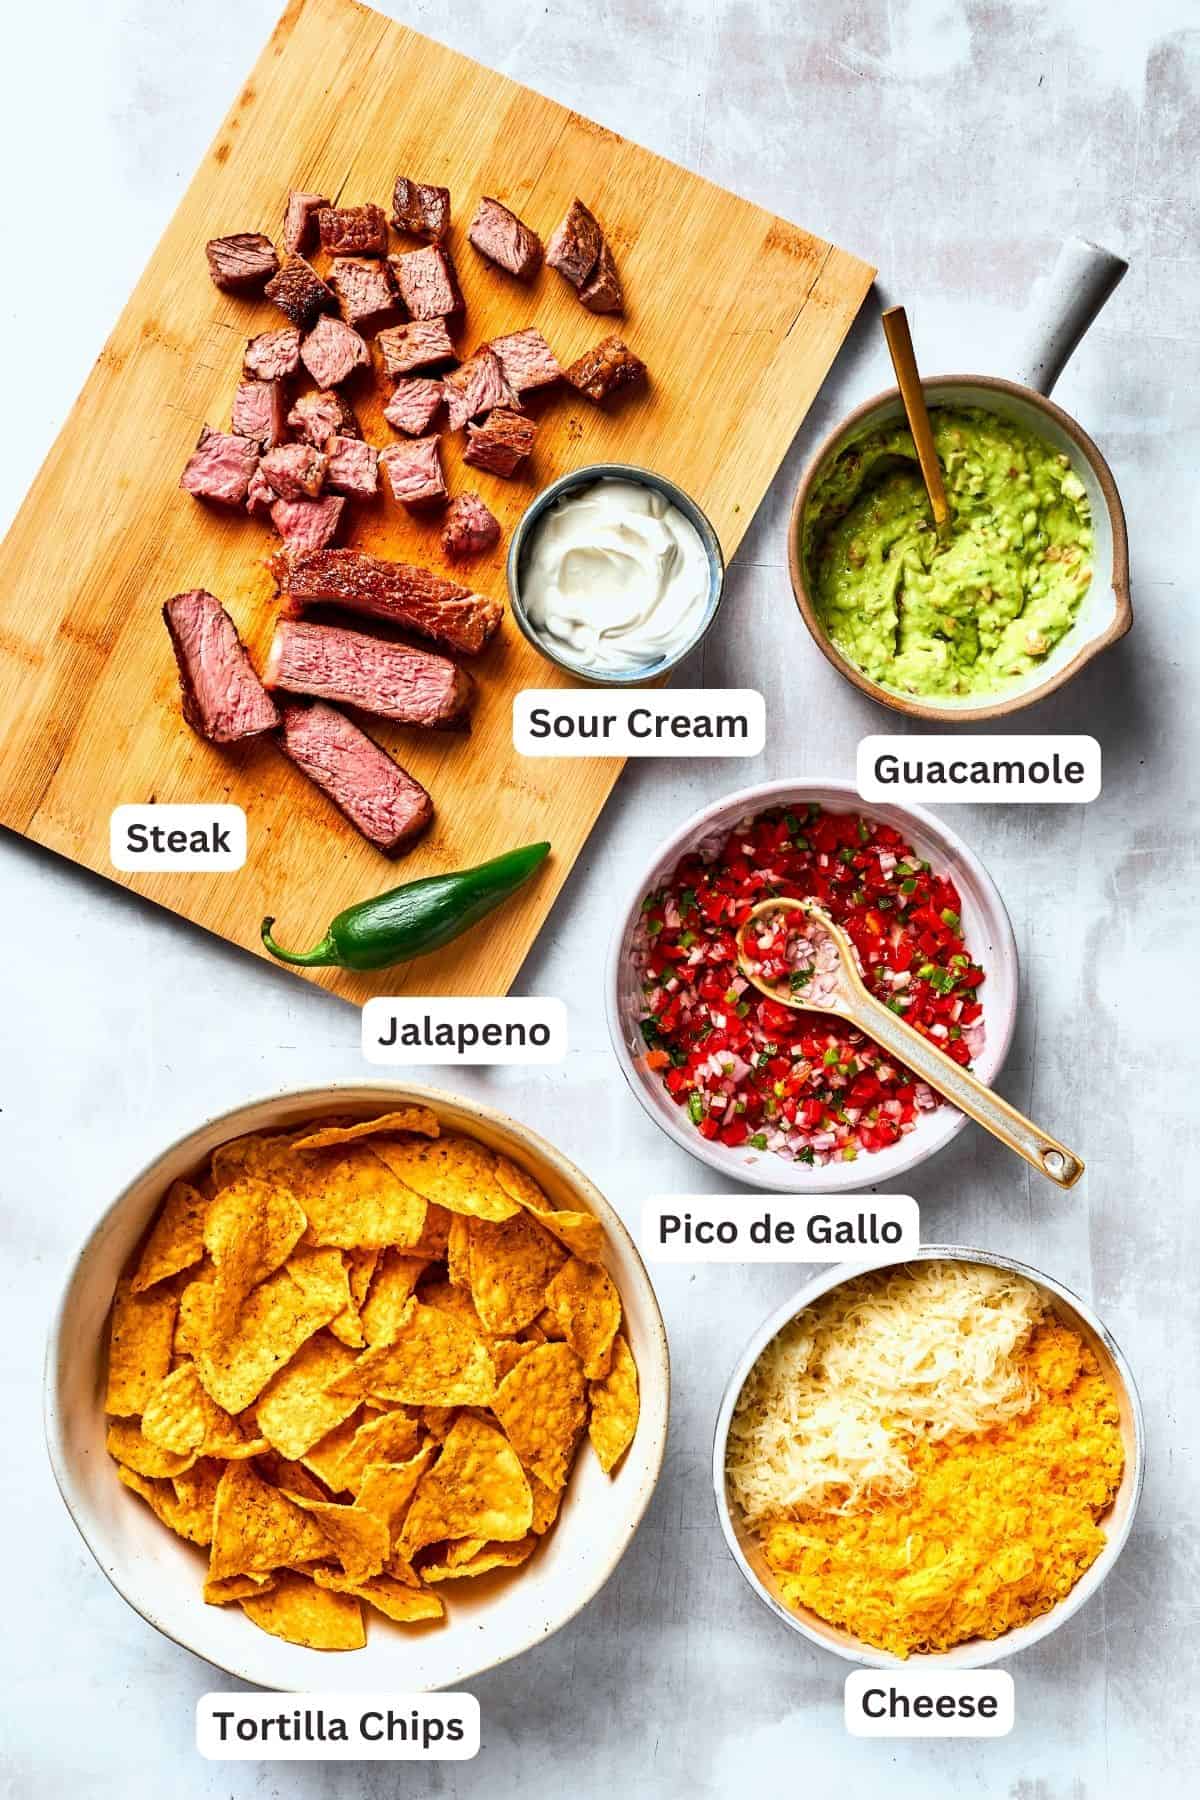 Ingredients for steak nachos are shown portioned out - guacamole, steak, pico de gallo, chips, and cheese.